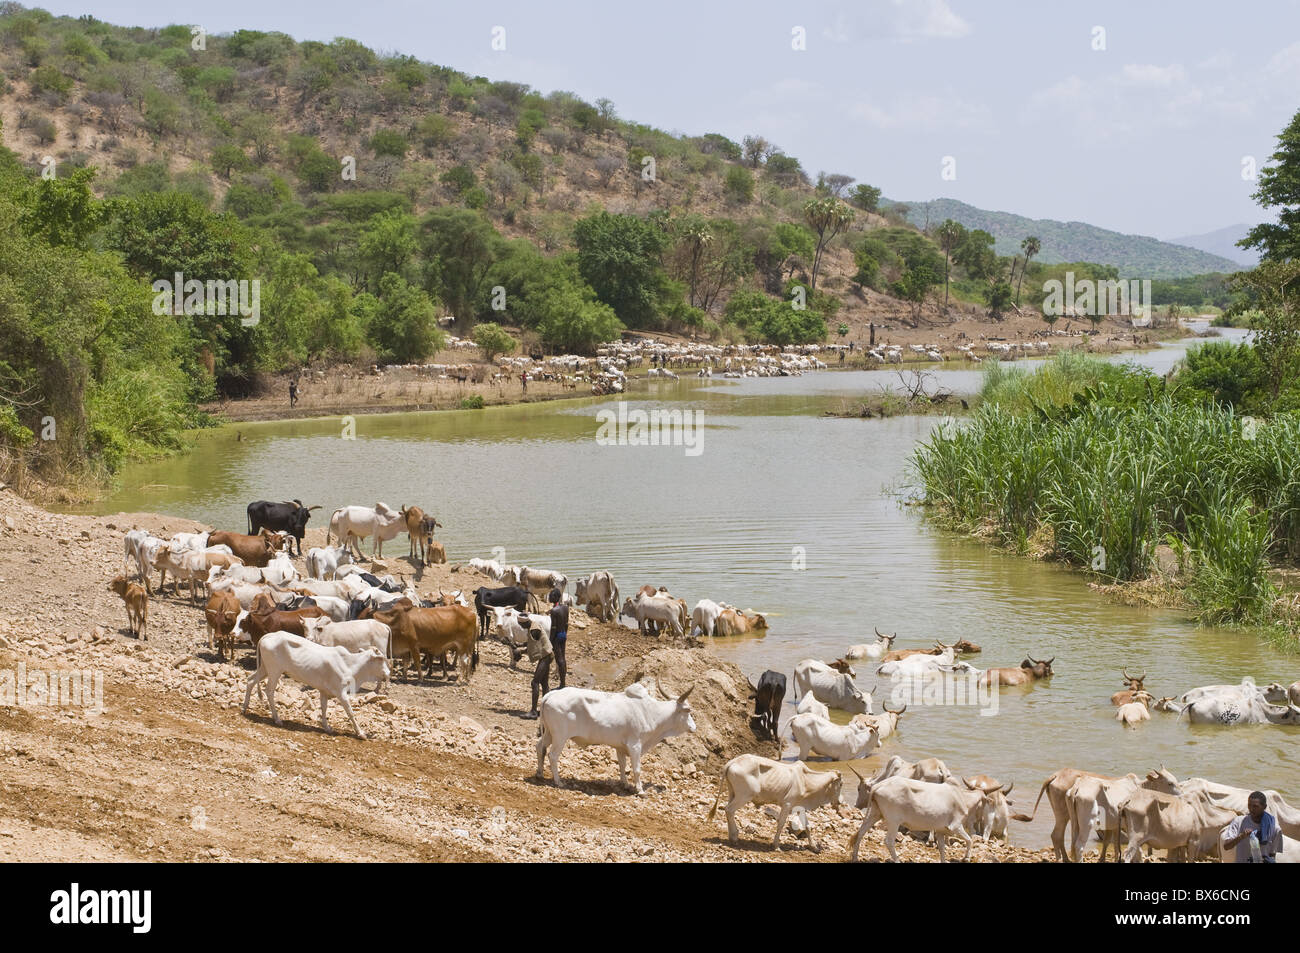 Cattle at the Omo River, Omo Valley, Ethiopia, Africa Stock Photo